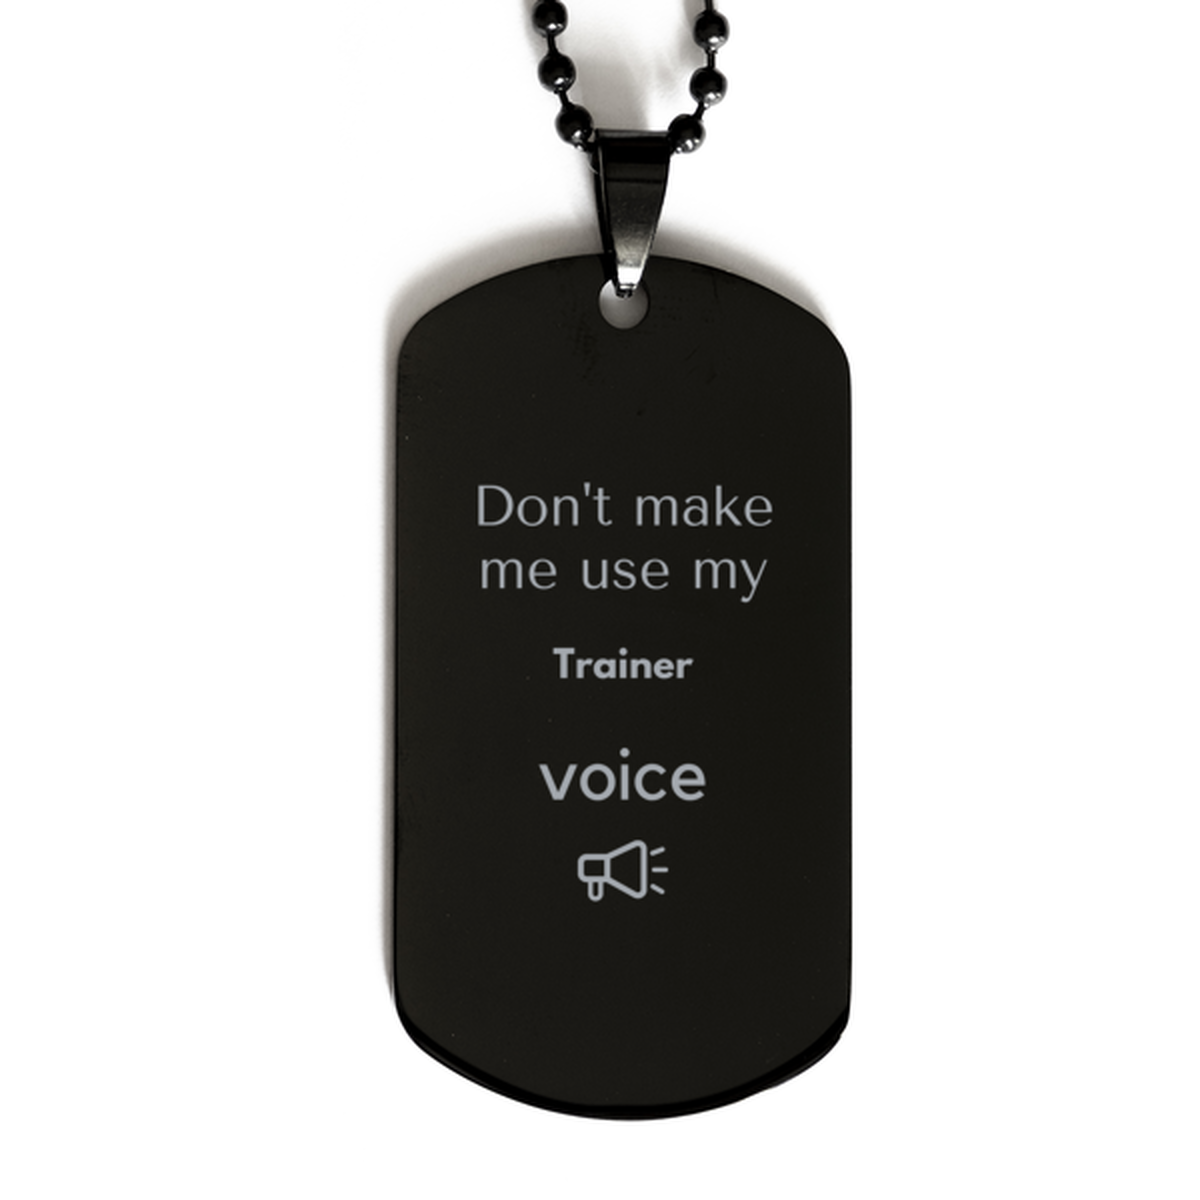 Don't make me use my Trainer voice, Sarcasm Trainer Gifts, Christmas Trainer Black Dog Tag Birthday Unique Gifts For Trainer Coworkers, Men, Women, Colleague, Friends